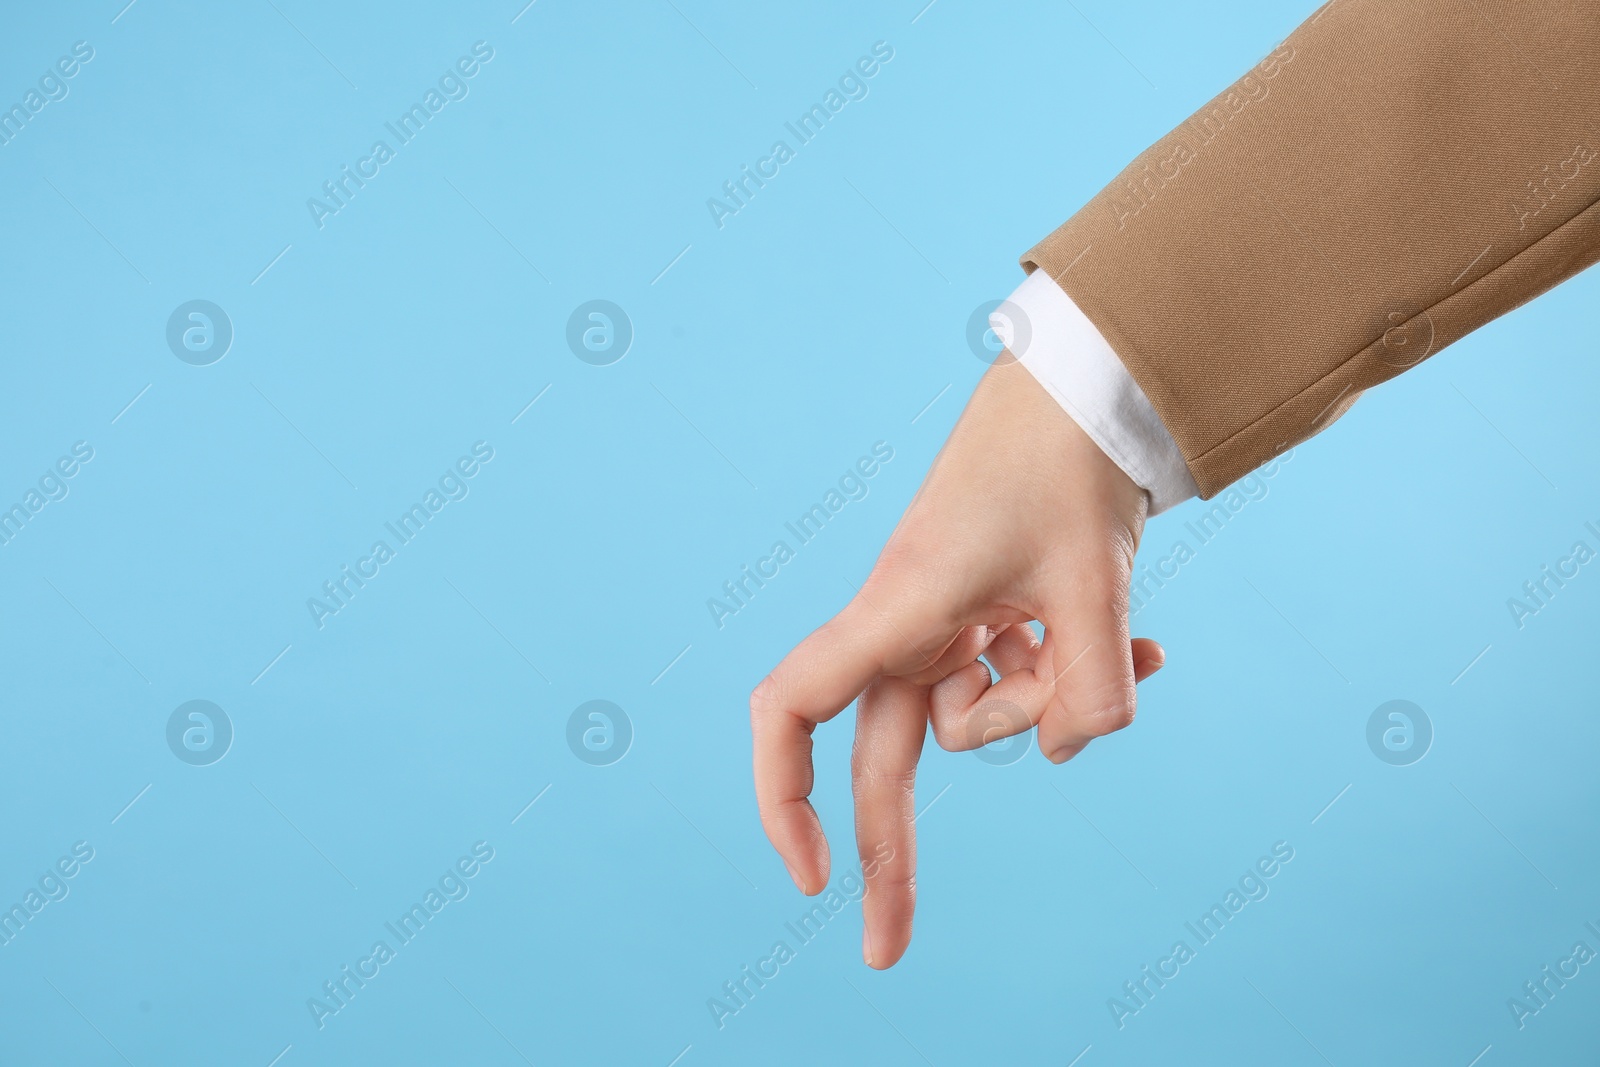 Photo of Businesswoman imitating walk with hand on light blue background, closeup. Finger gesture